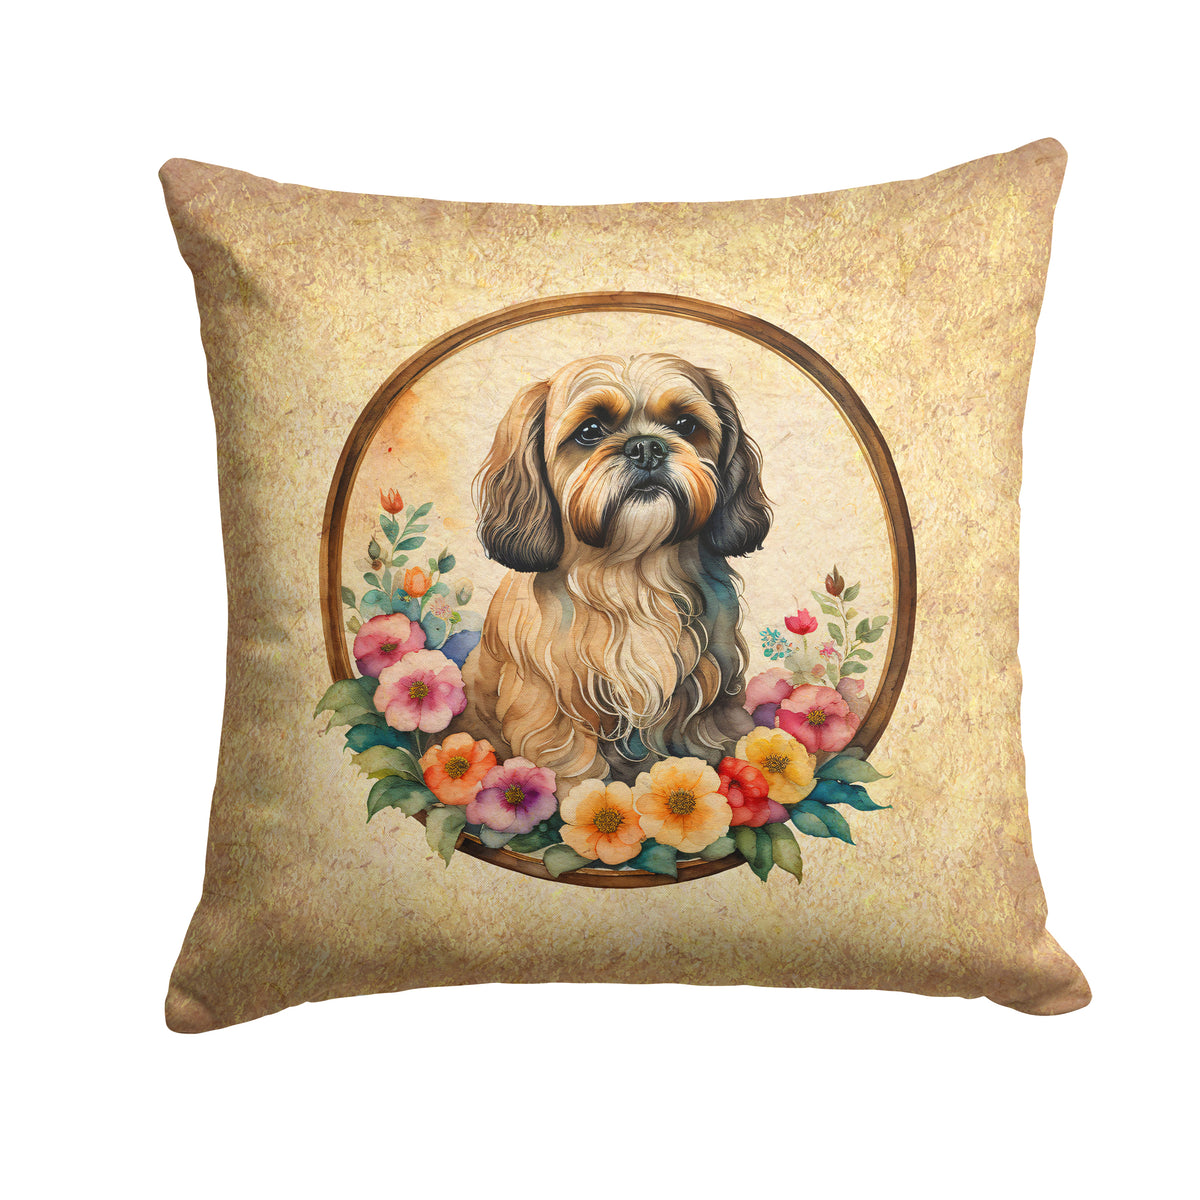 Buy this Lhasa Apso and Flowers Fabric Decorative Pillow